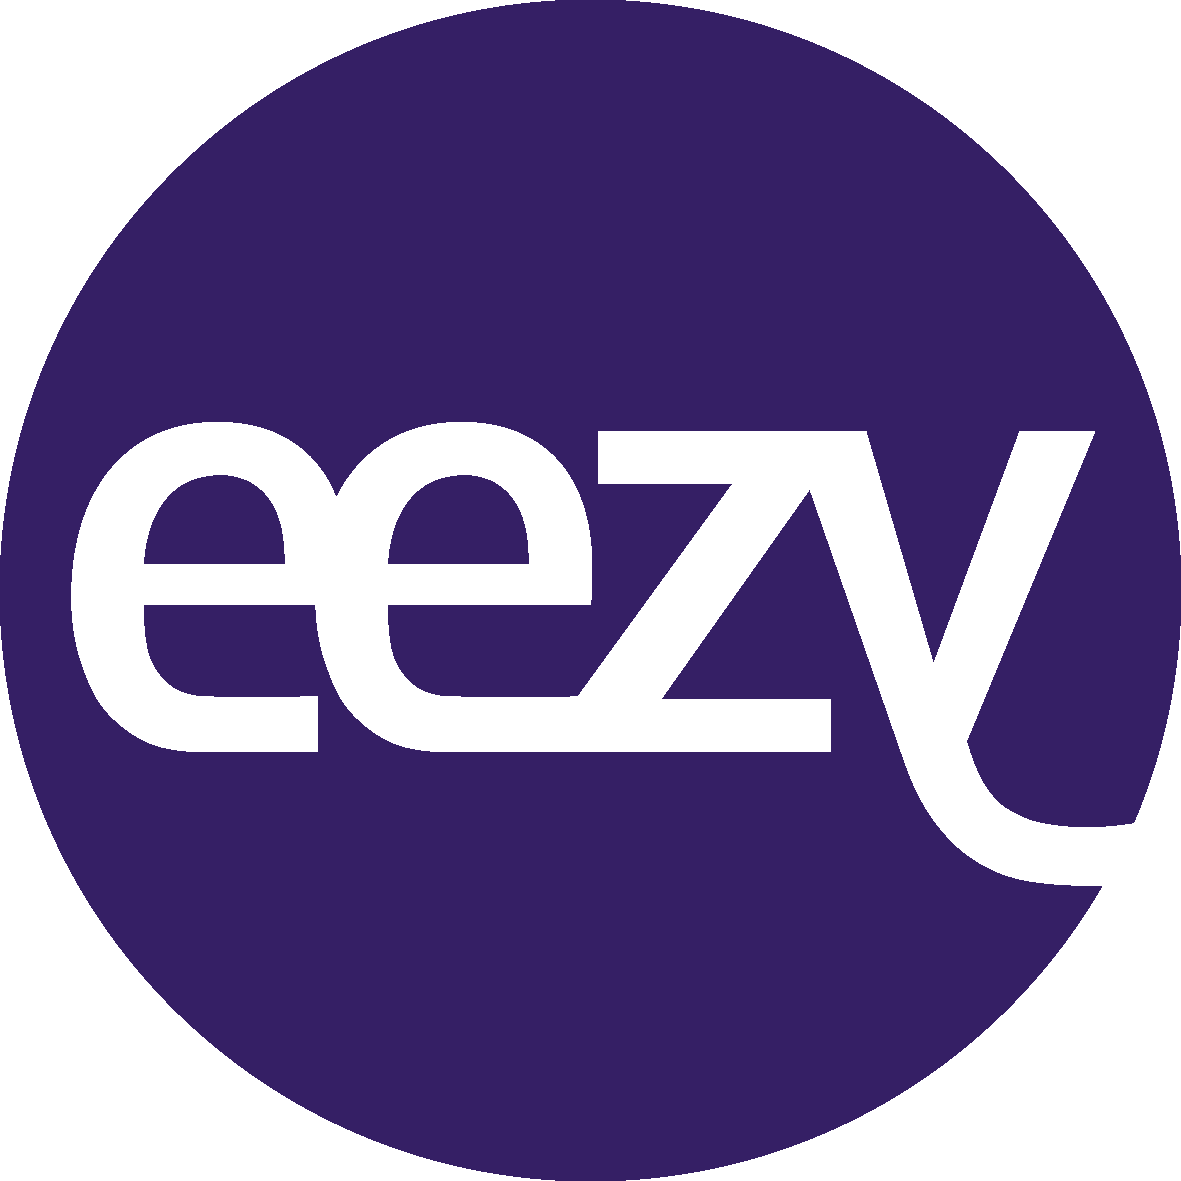 Eezy PLC makes chang